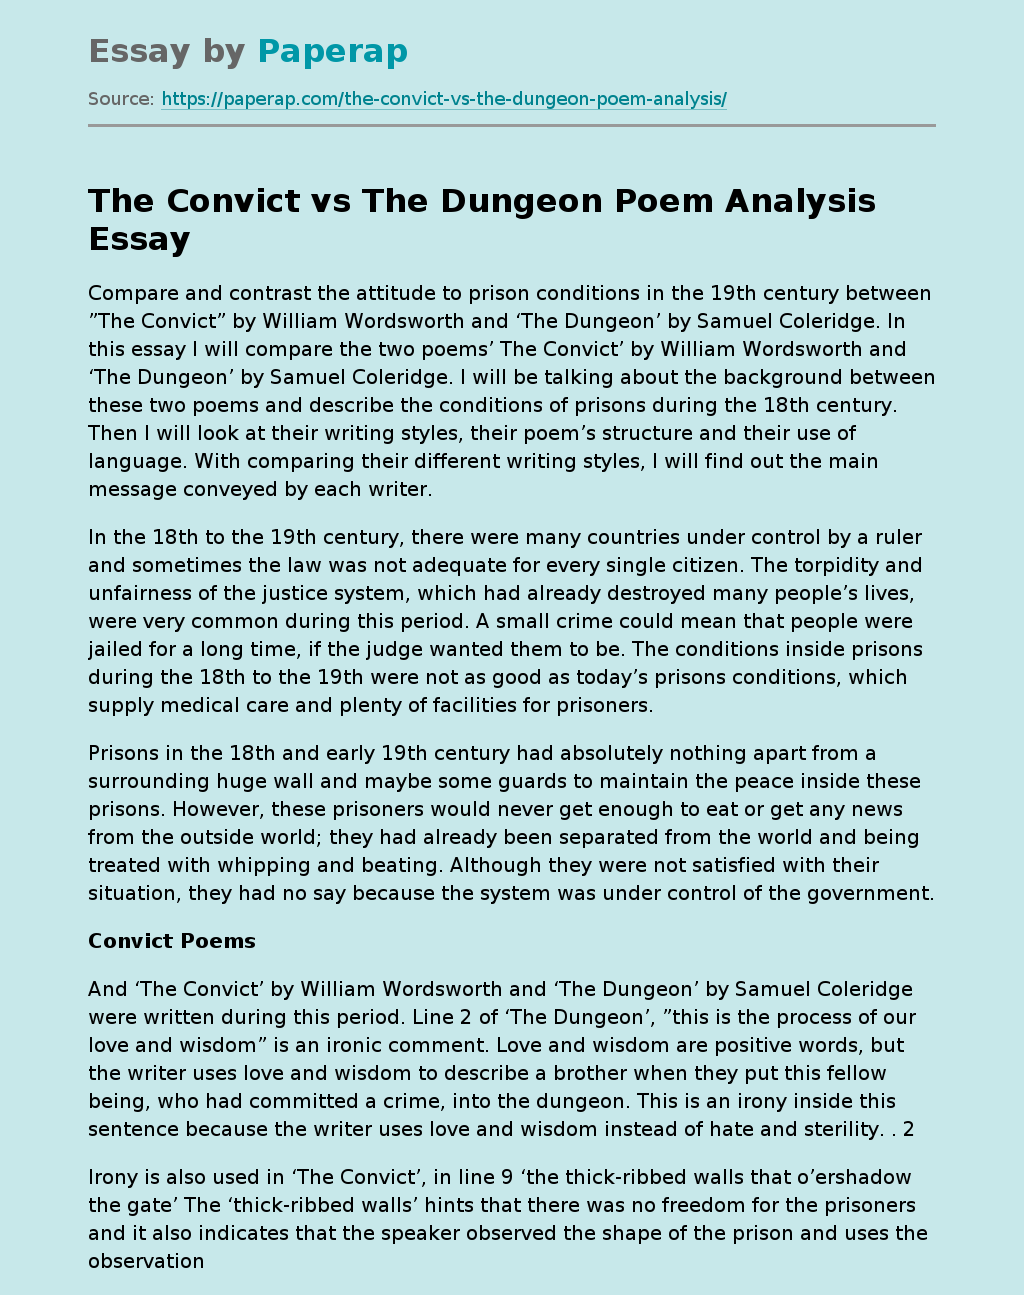 The Convict vs The Dungeon Poem Analysis